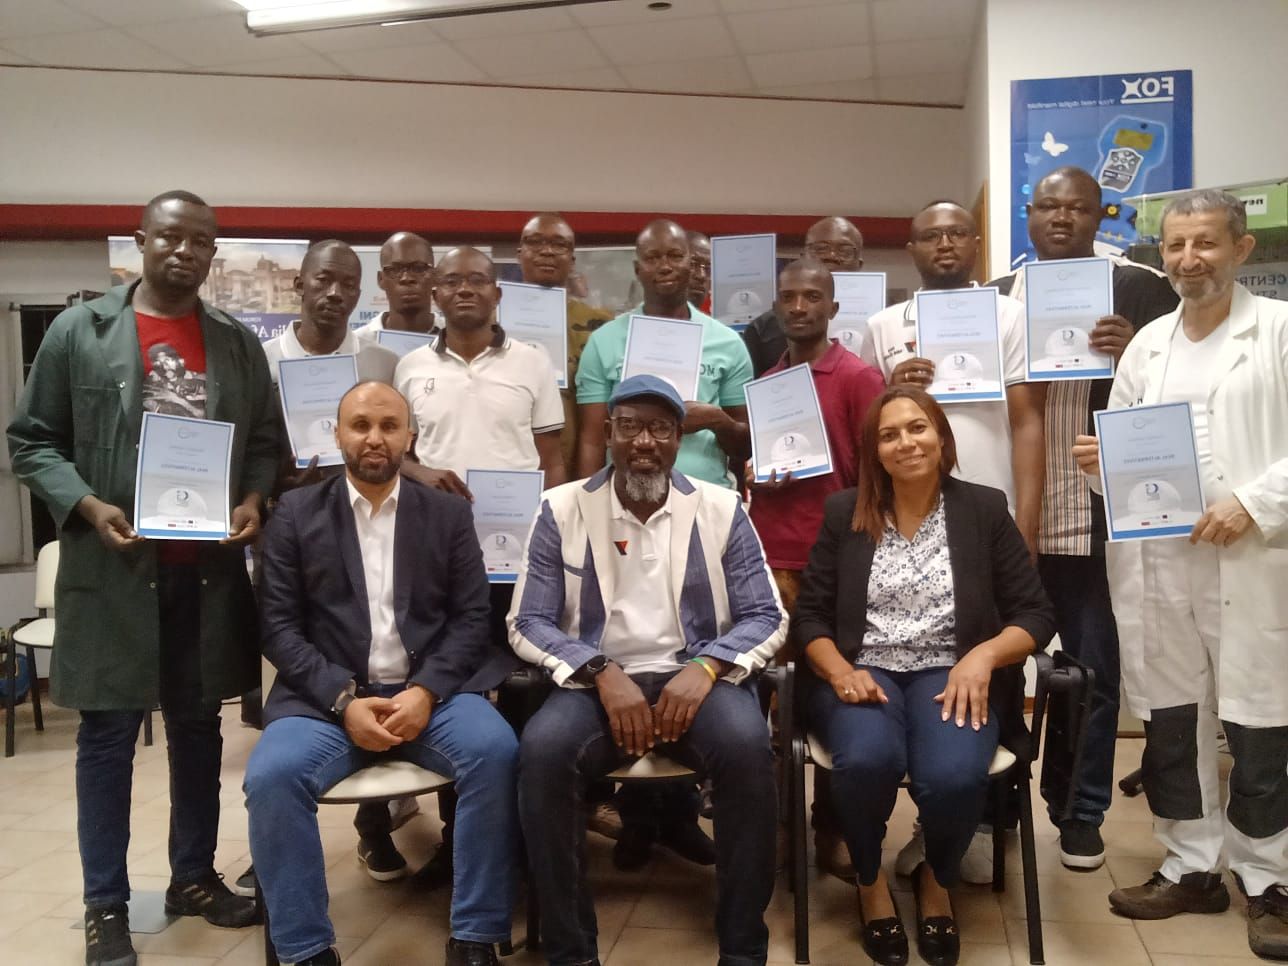 Flammable refrigerants – Training session for African refrigeration engineers in Italy